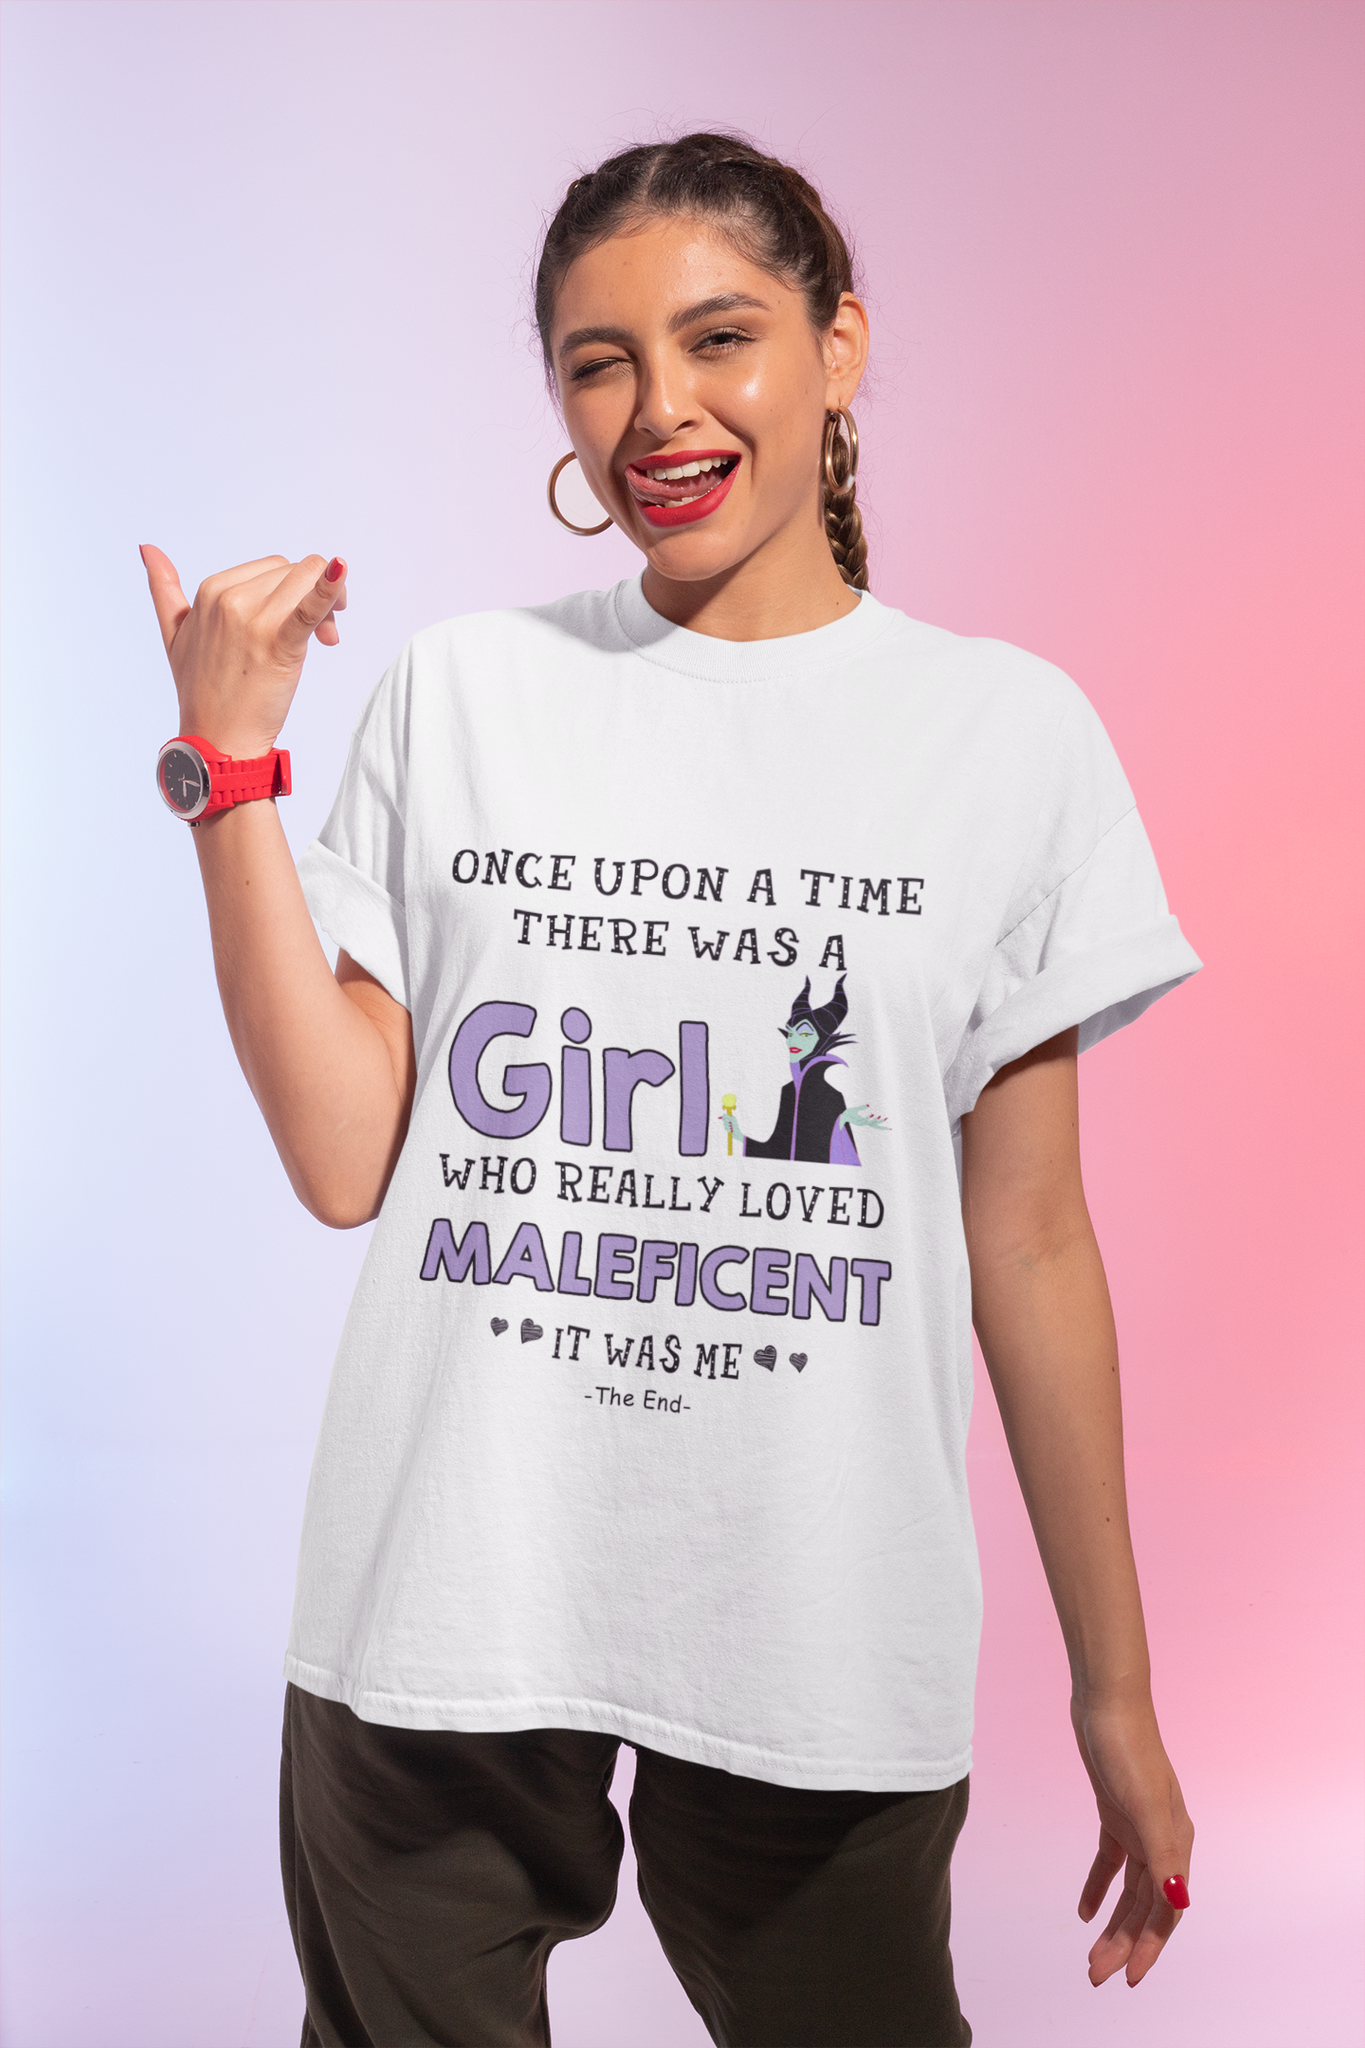 Disney Maleficent T Shirt, Once Upon A Time There Was A Girl Who Really Loved Maleficent Tshirt, Disney Villains Shirt